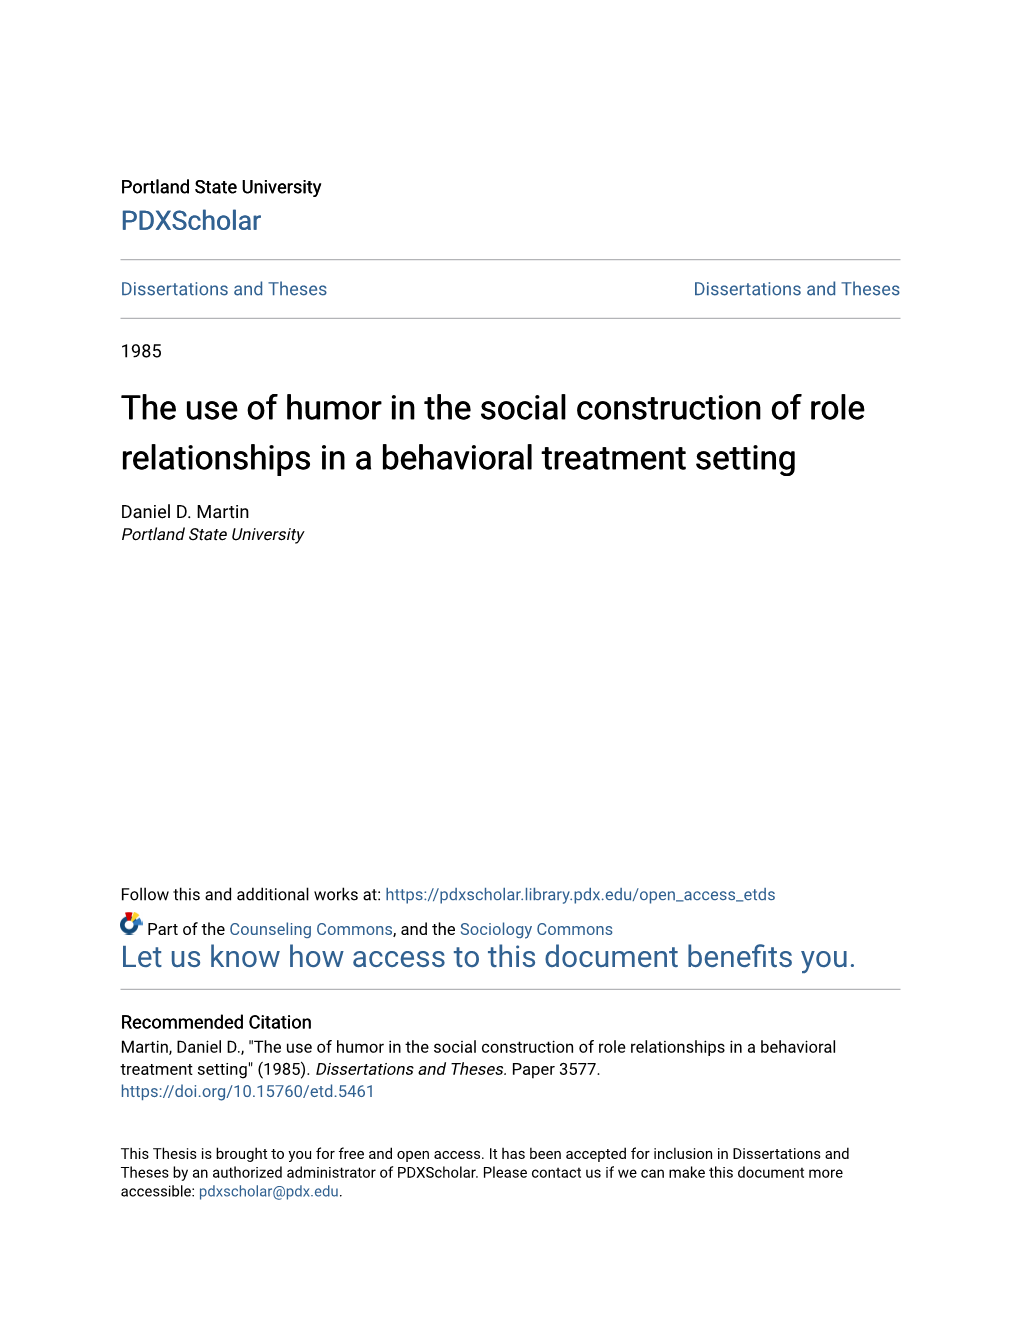 The Use of Humor in the Social Construction of Role Relationships in a Behavioral Treatment Setting